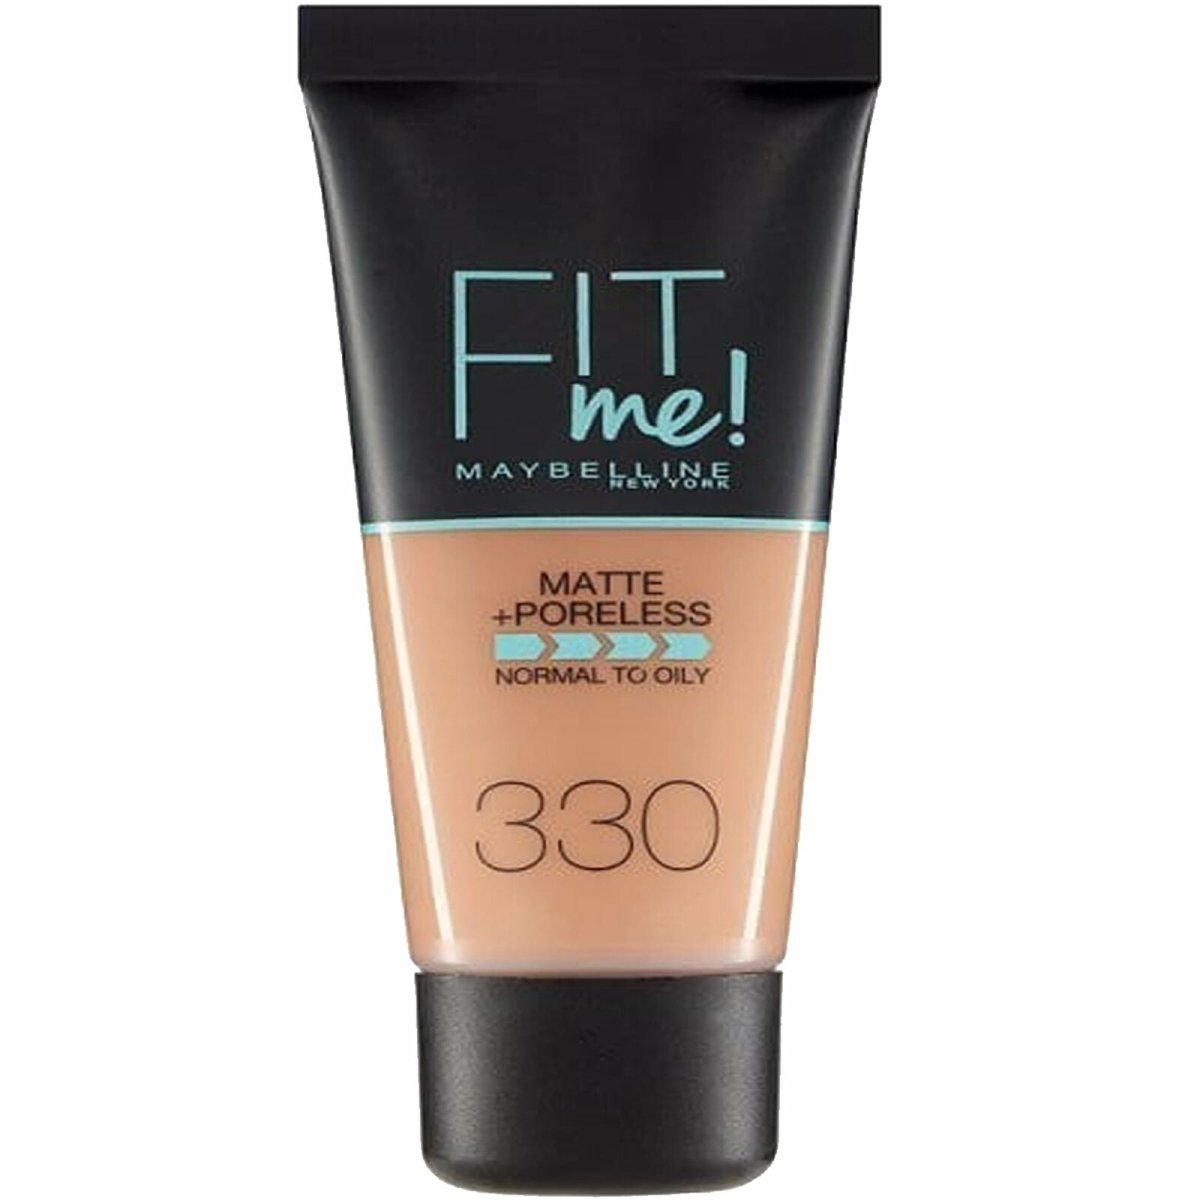 Image of Maybelline Fit Me Matte + Poreless Foundation - 330 Toffee